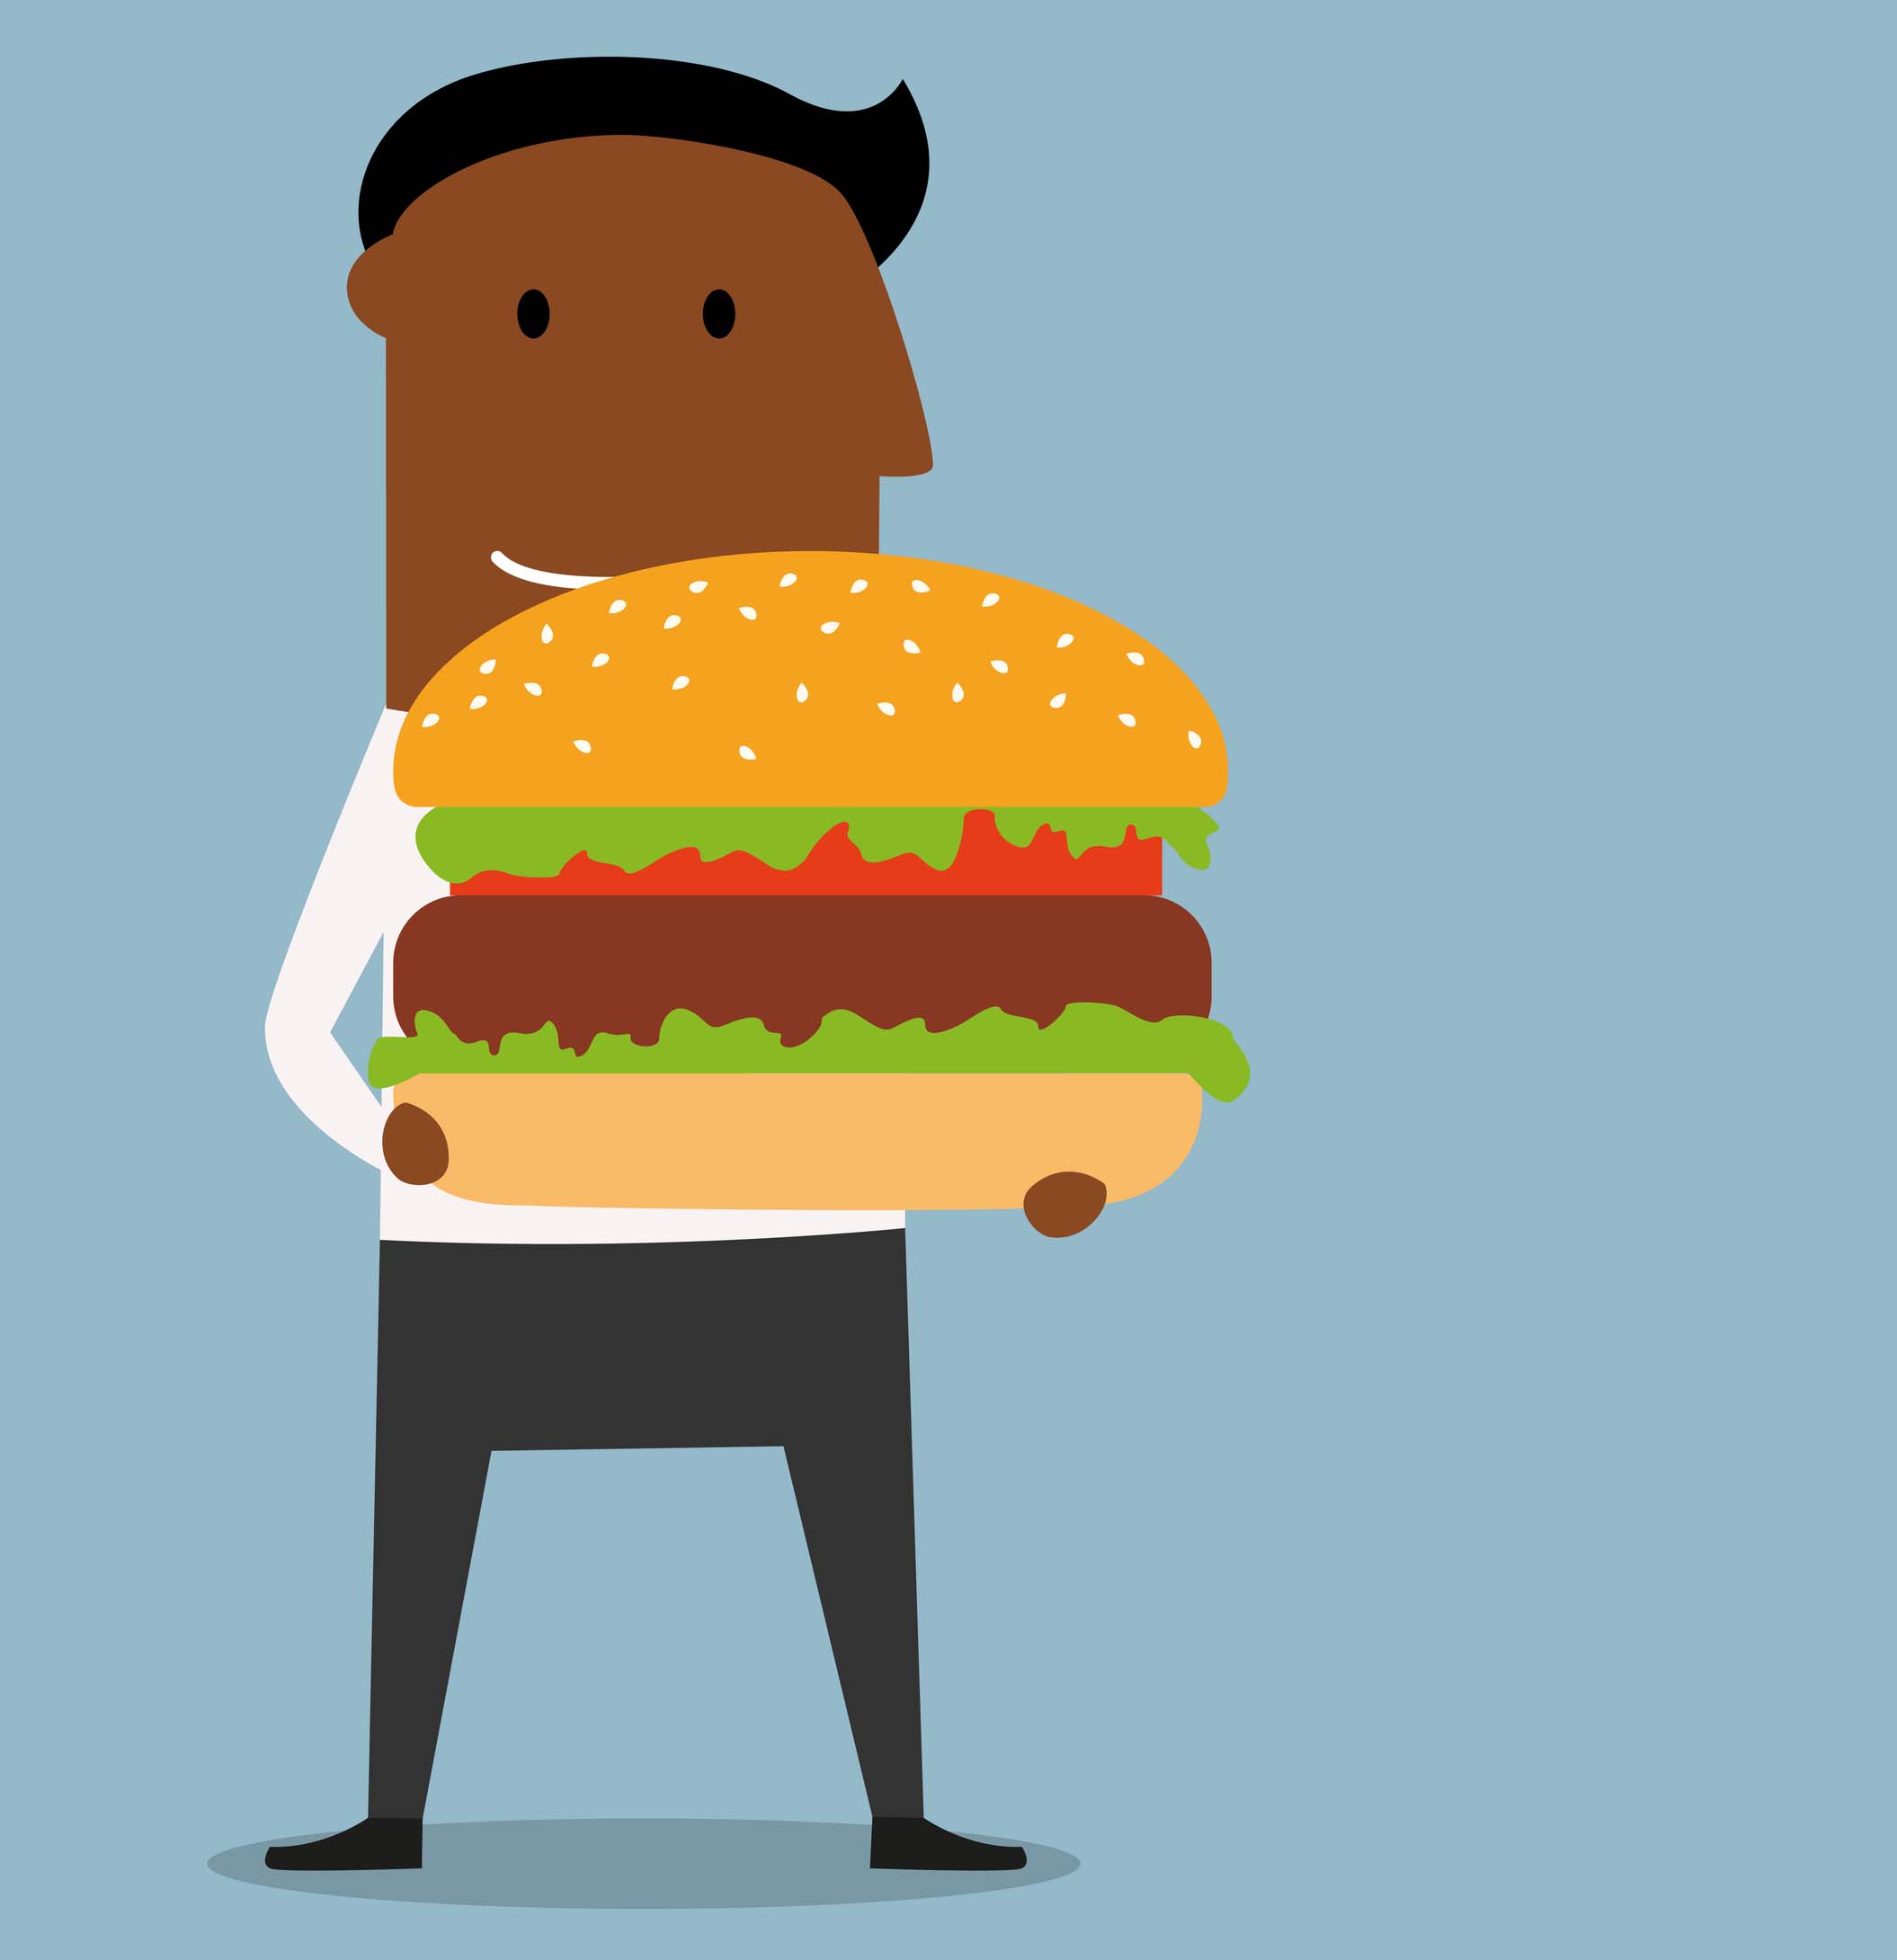 Man with Burger - Careers - Financial Industry Resources